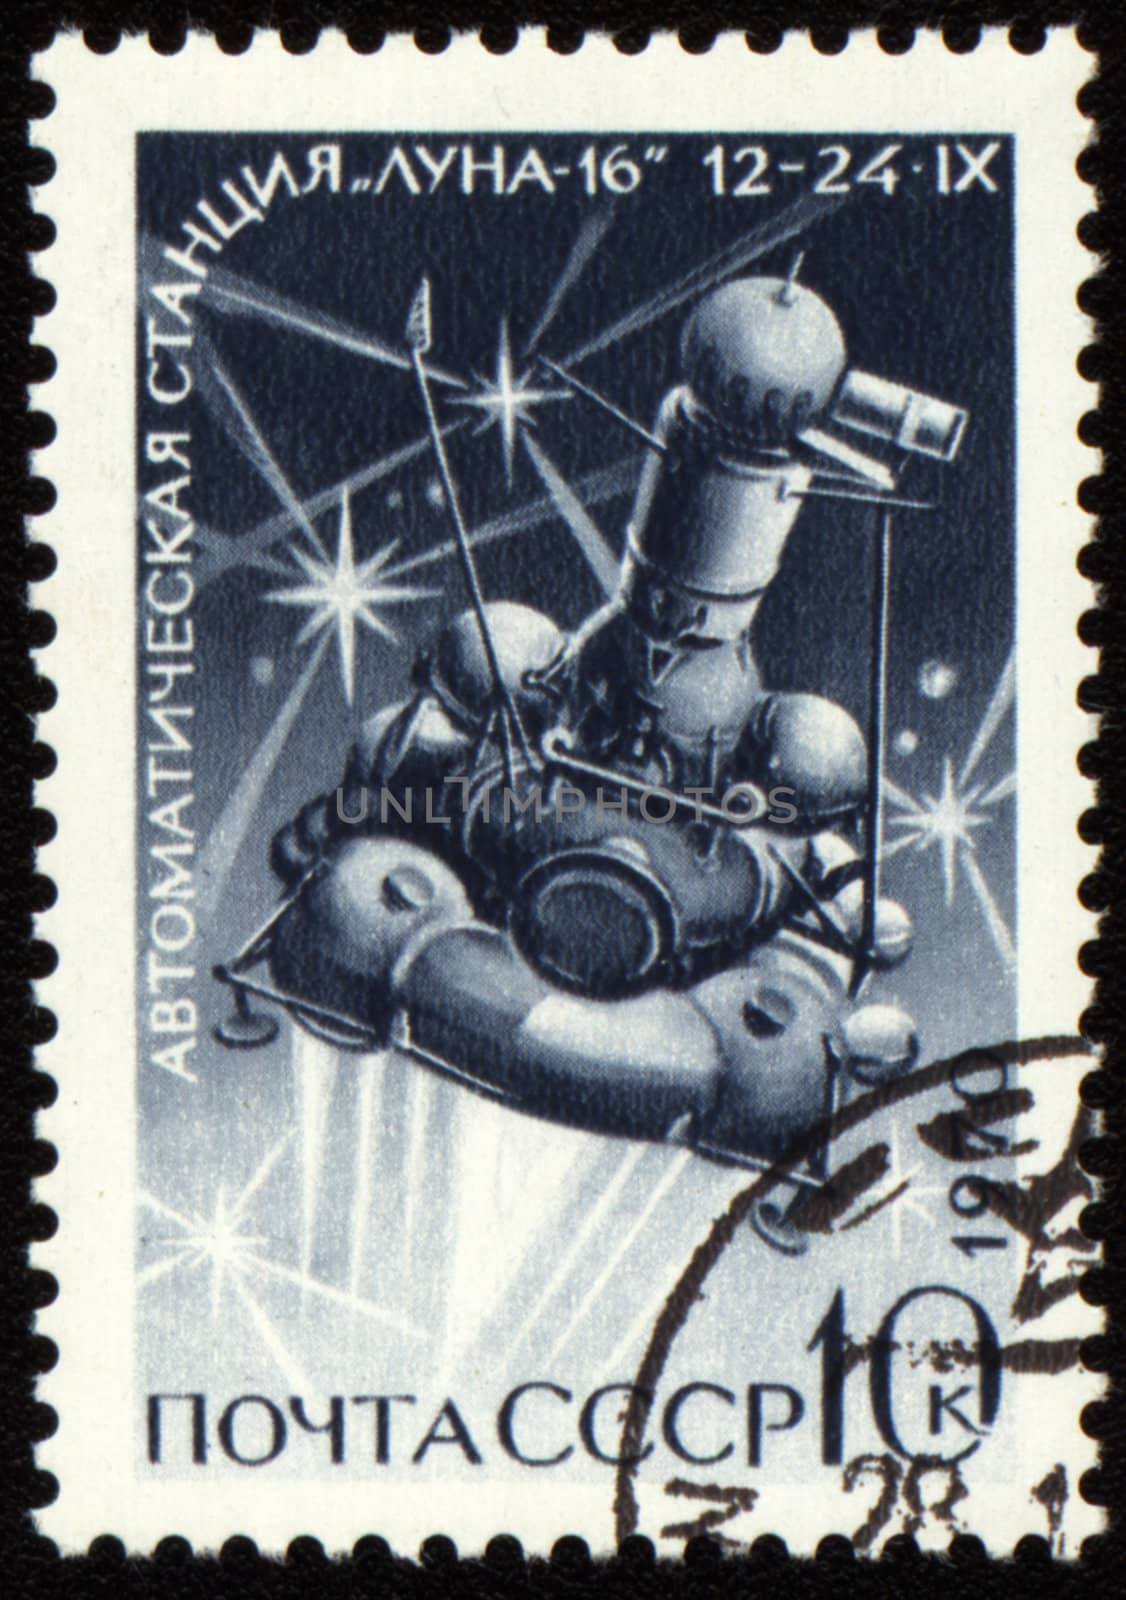 Postage stamp with soviet automatic station Luna-16 by wander